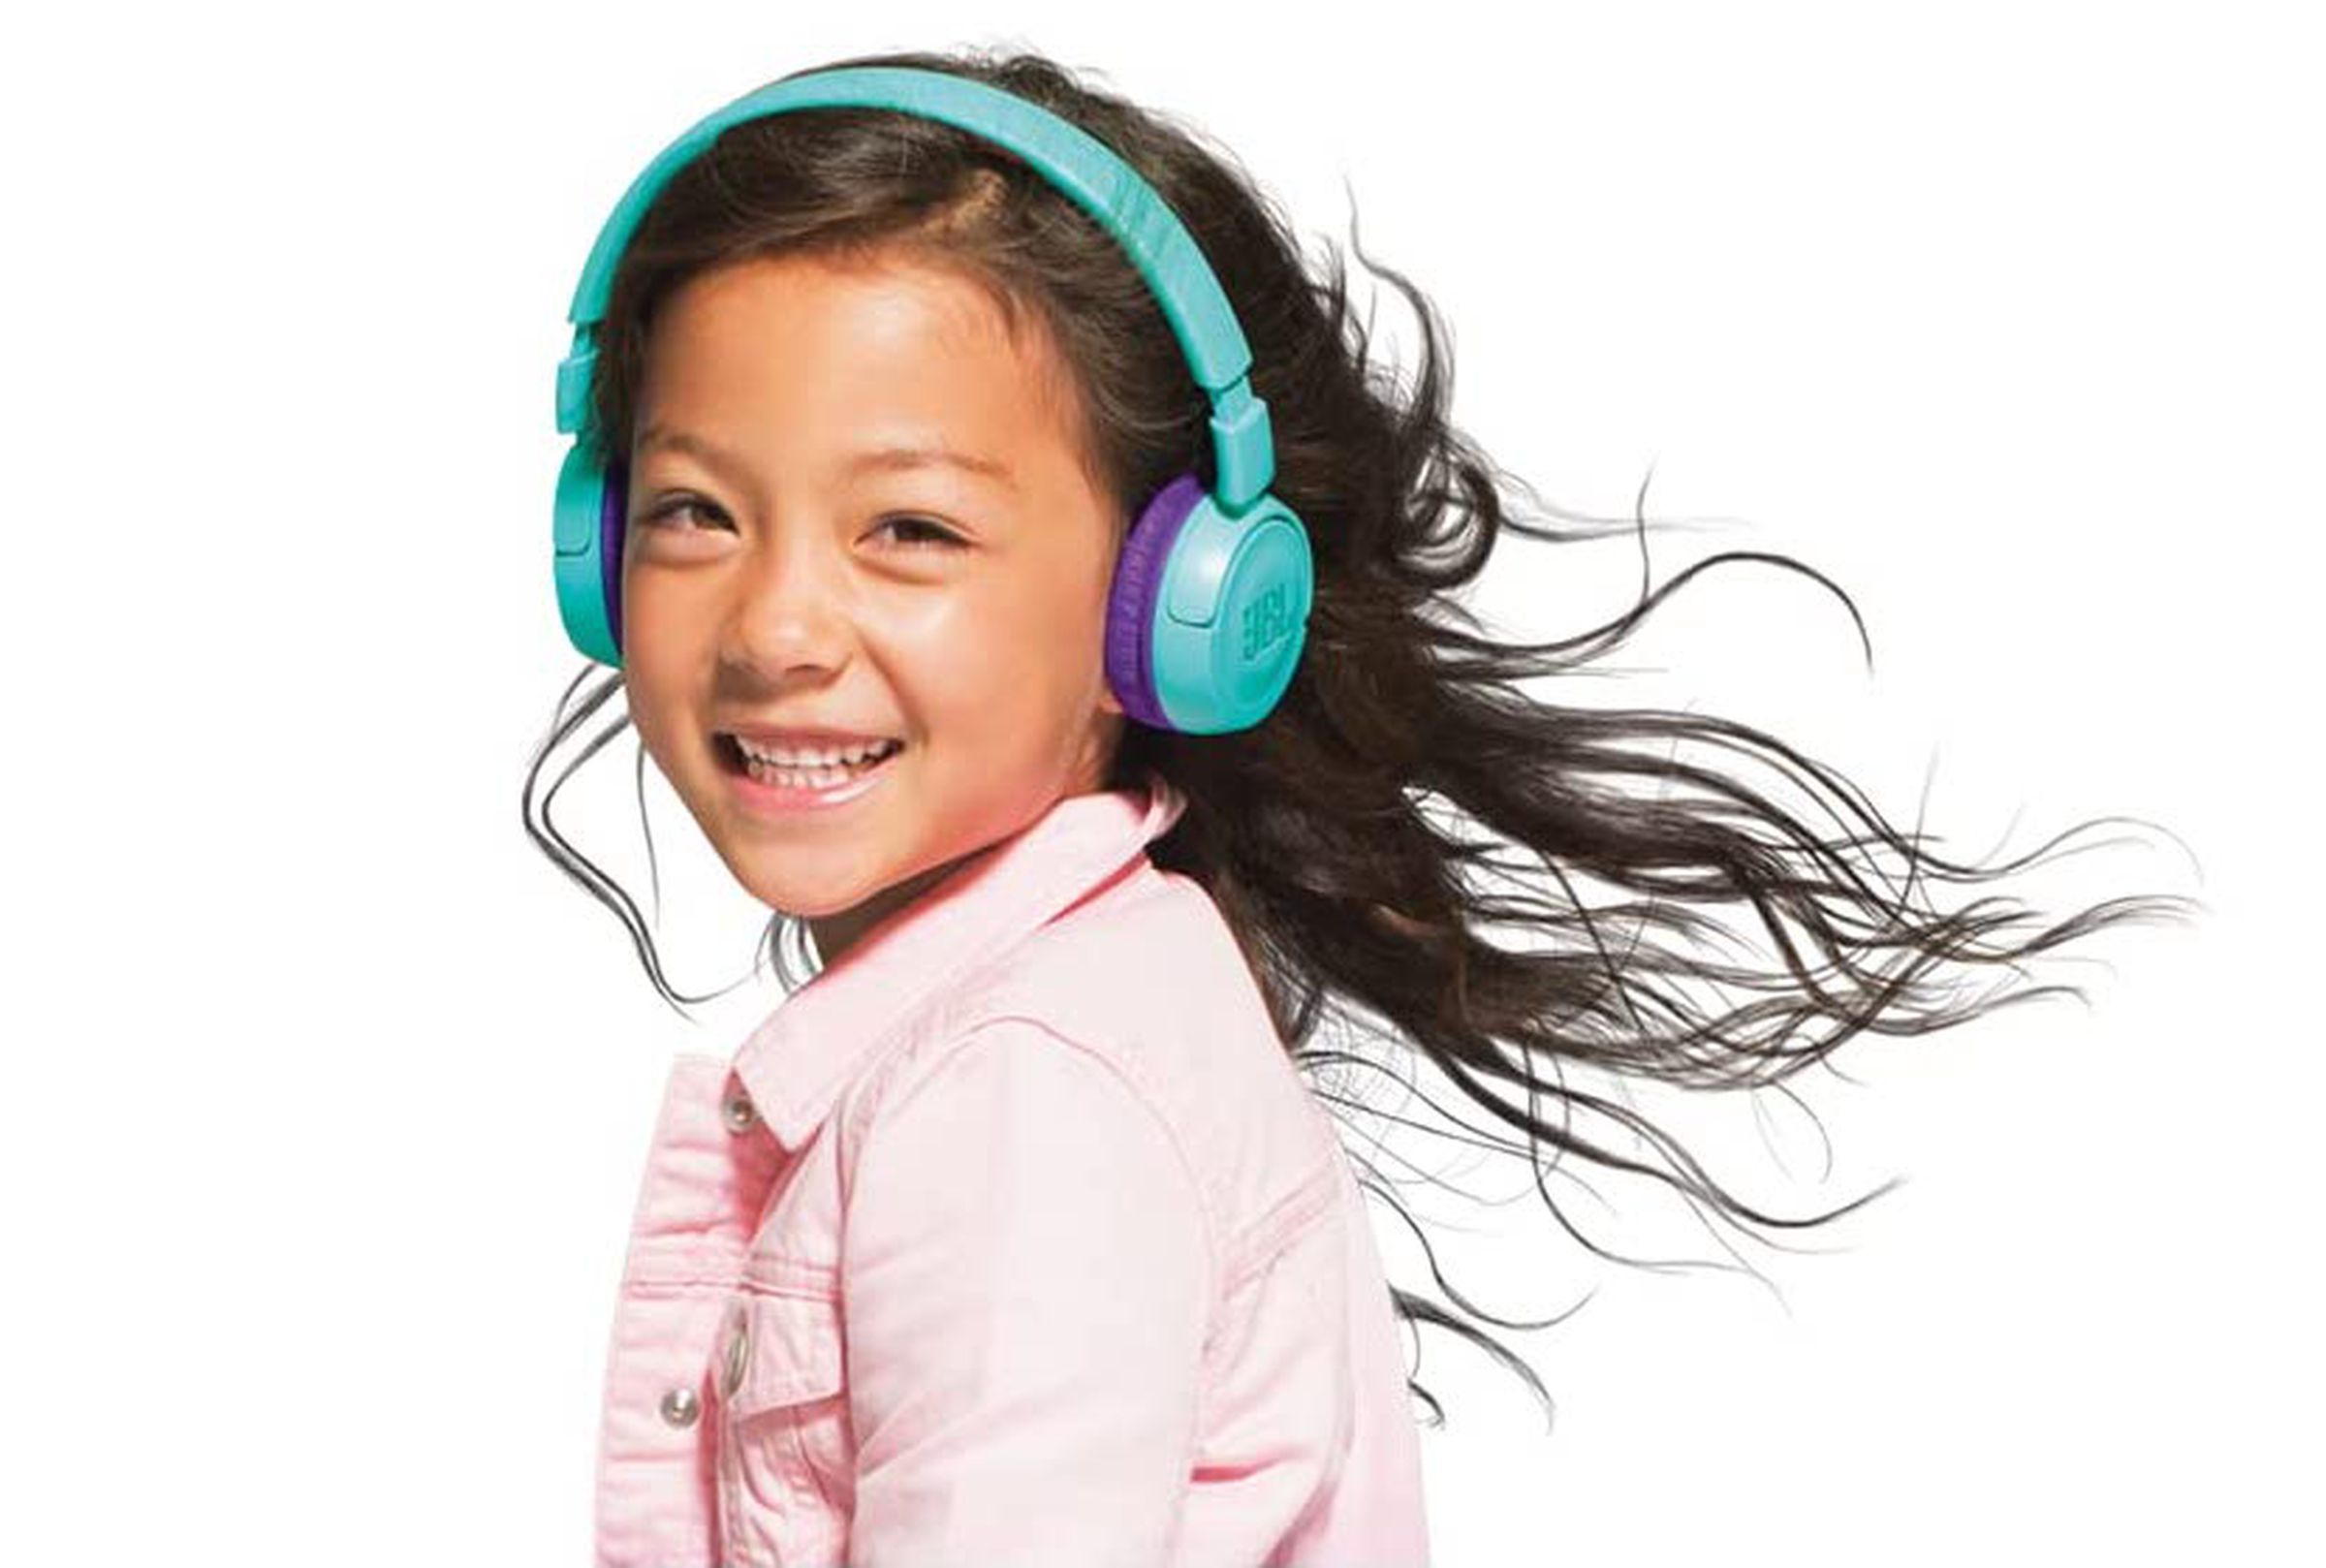 JBL’s JR 300BT headphones have kid-friendly controls and should sound better than many other sets in this price range.